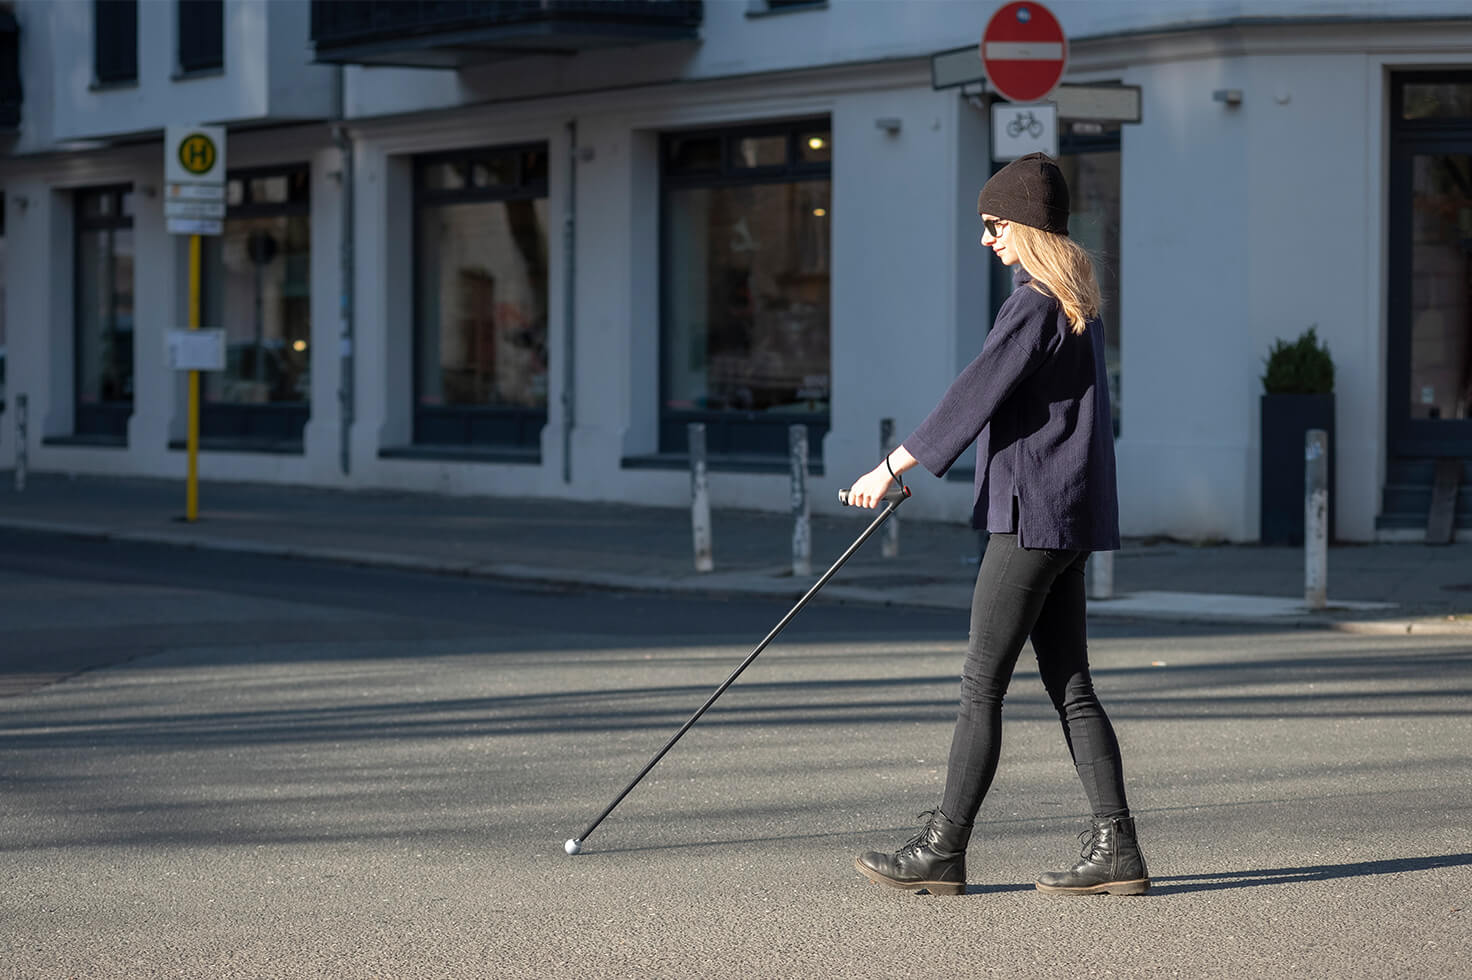 Smart walking stick - an electronic approach to assist visually